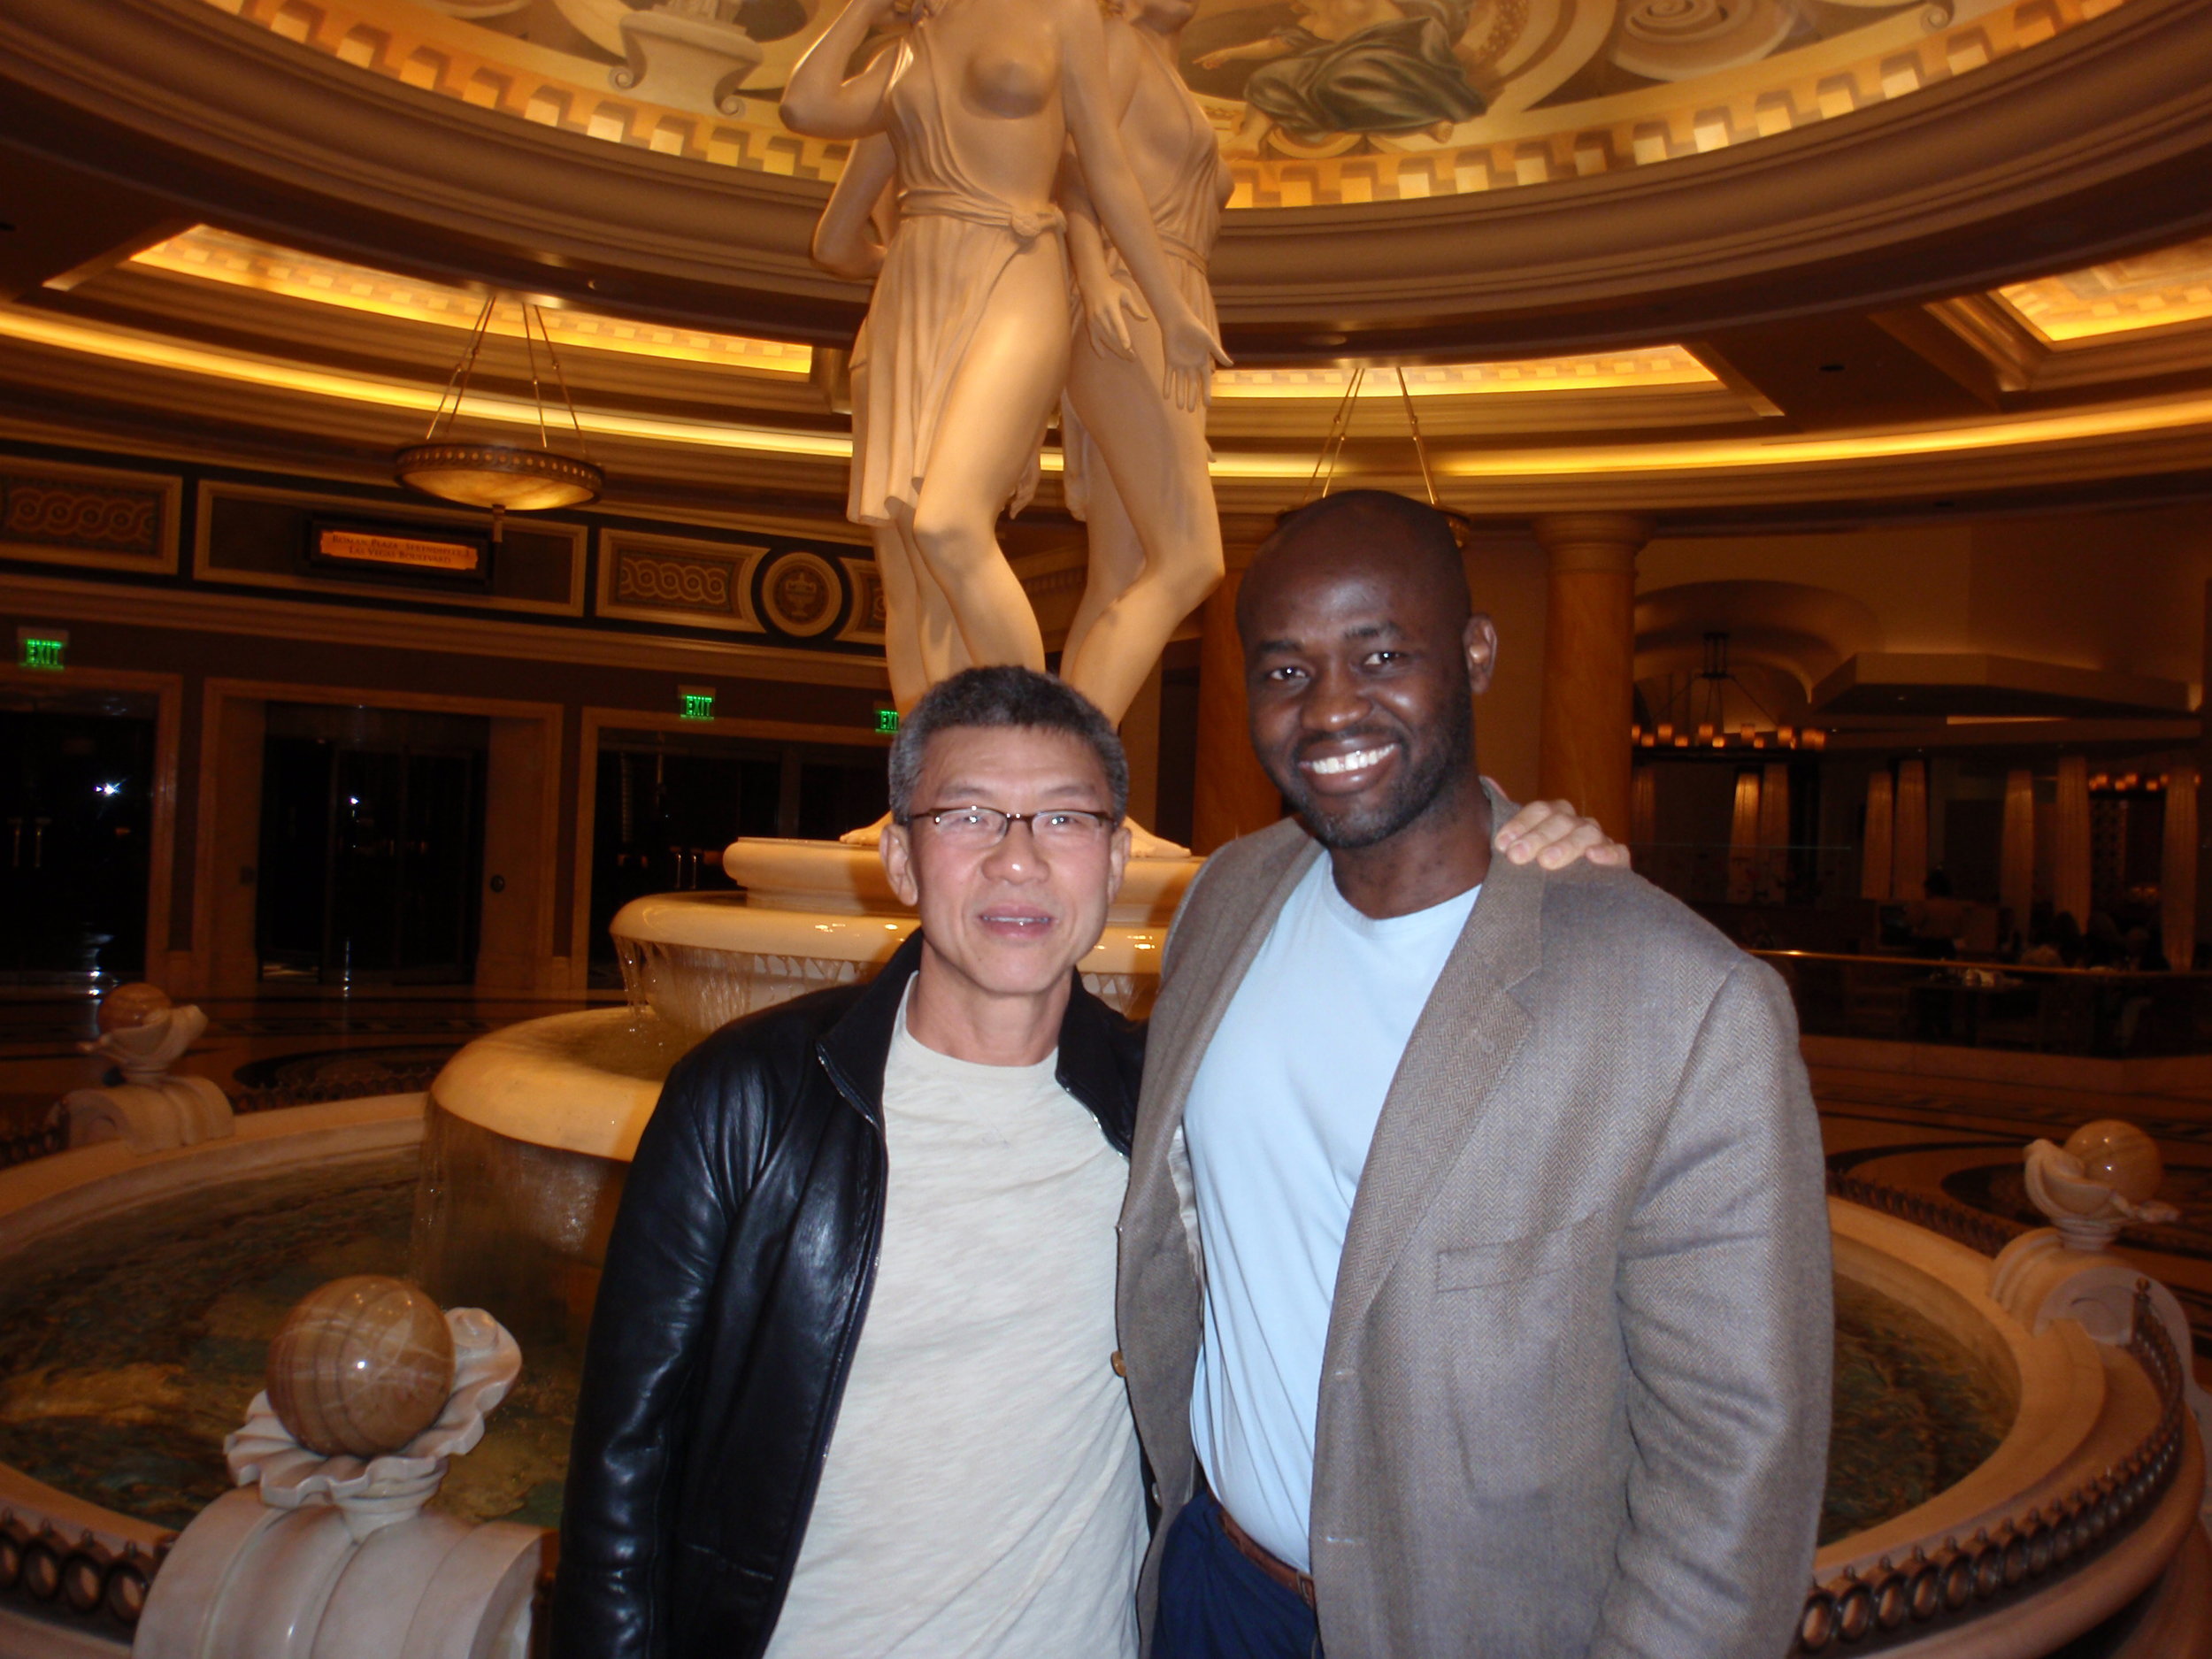   LAS VEGAS, November 20, 2009: What are the odds that I would run into the bridegroom, Doug Lo, at Caesar's Palace the night before the big day.  